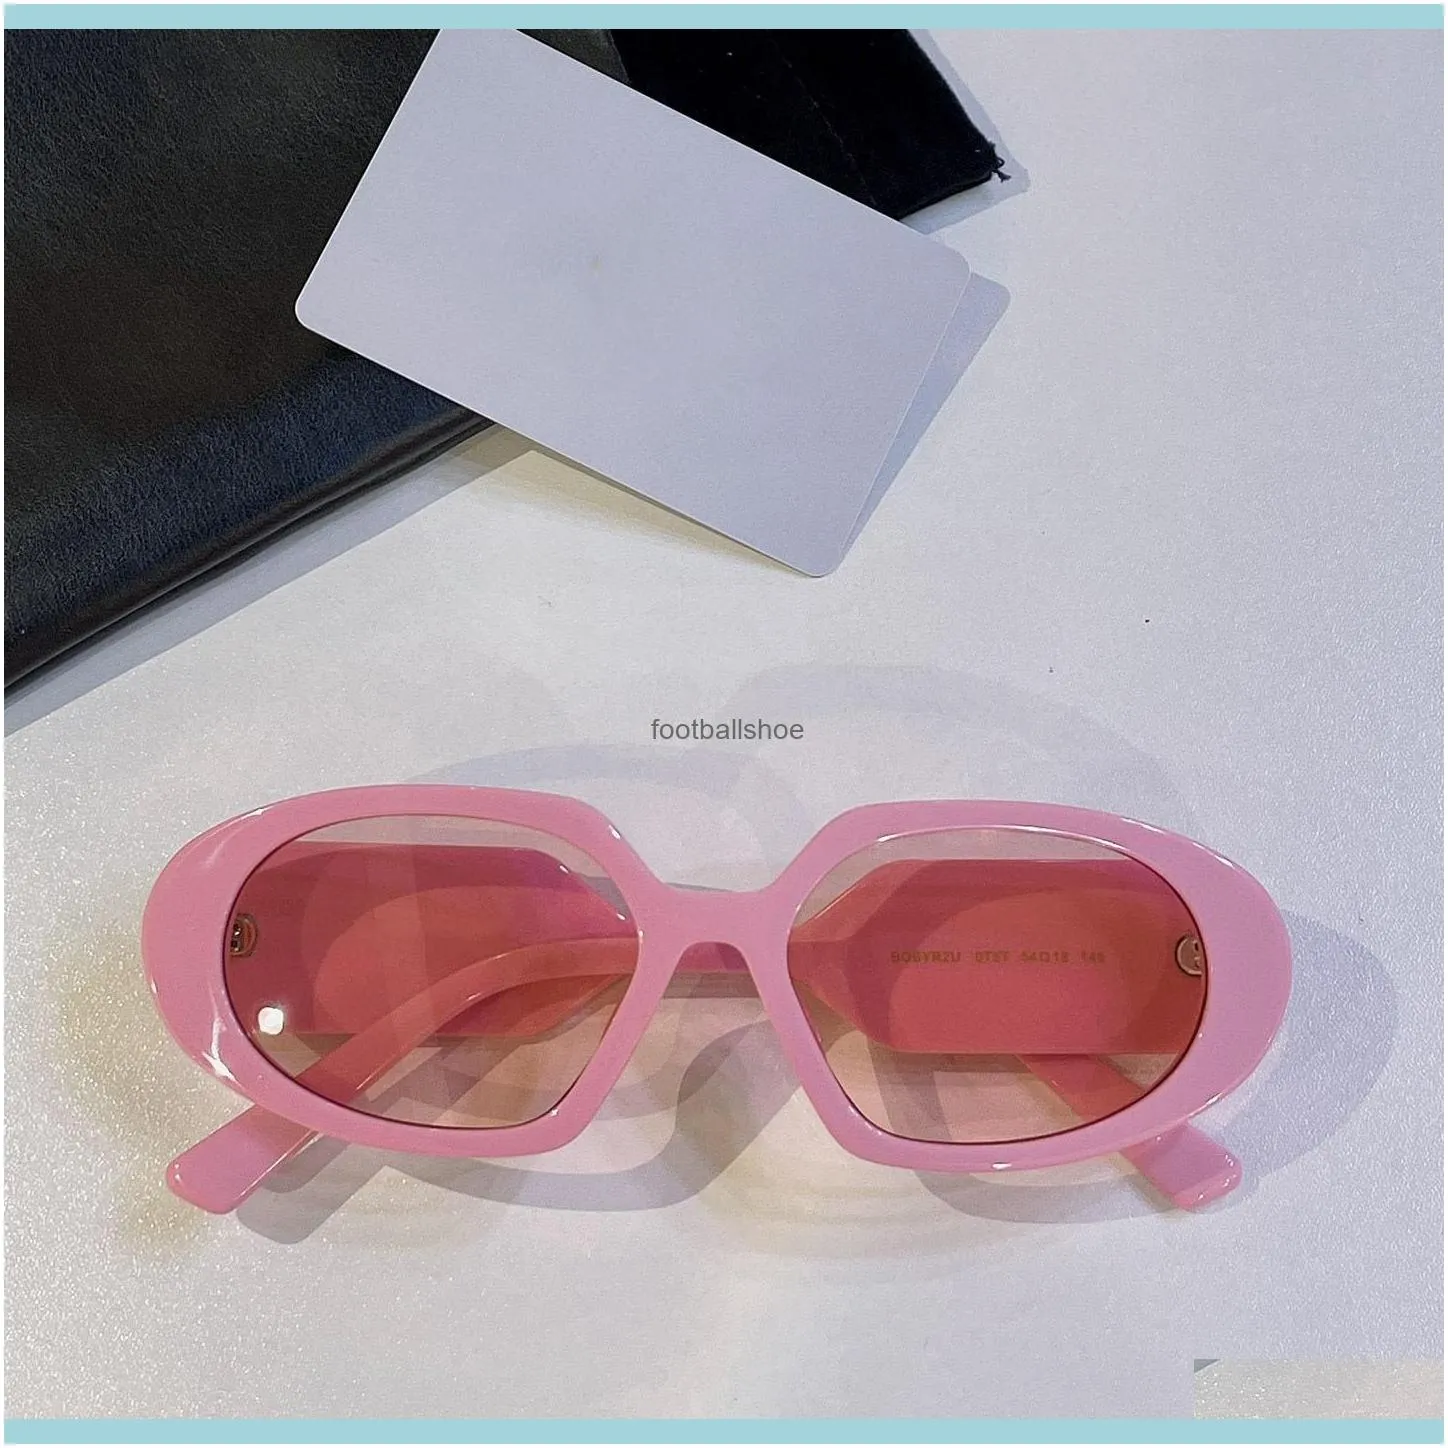 Sunglasses AAAAA Sell well bluelight oversized small face Top high quality original counter brand designer spectacles glasses mens for womens luxury